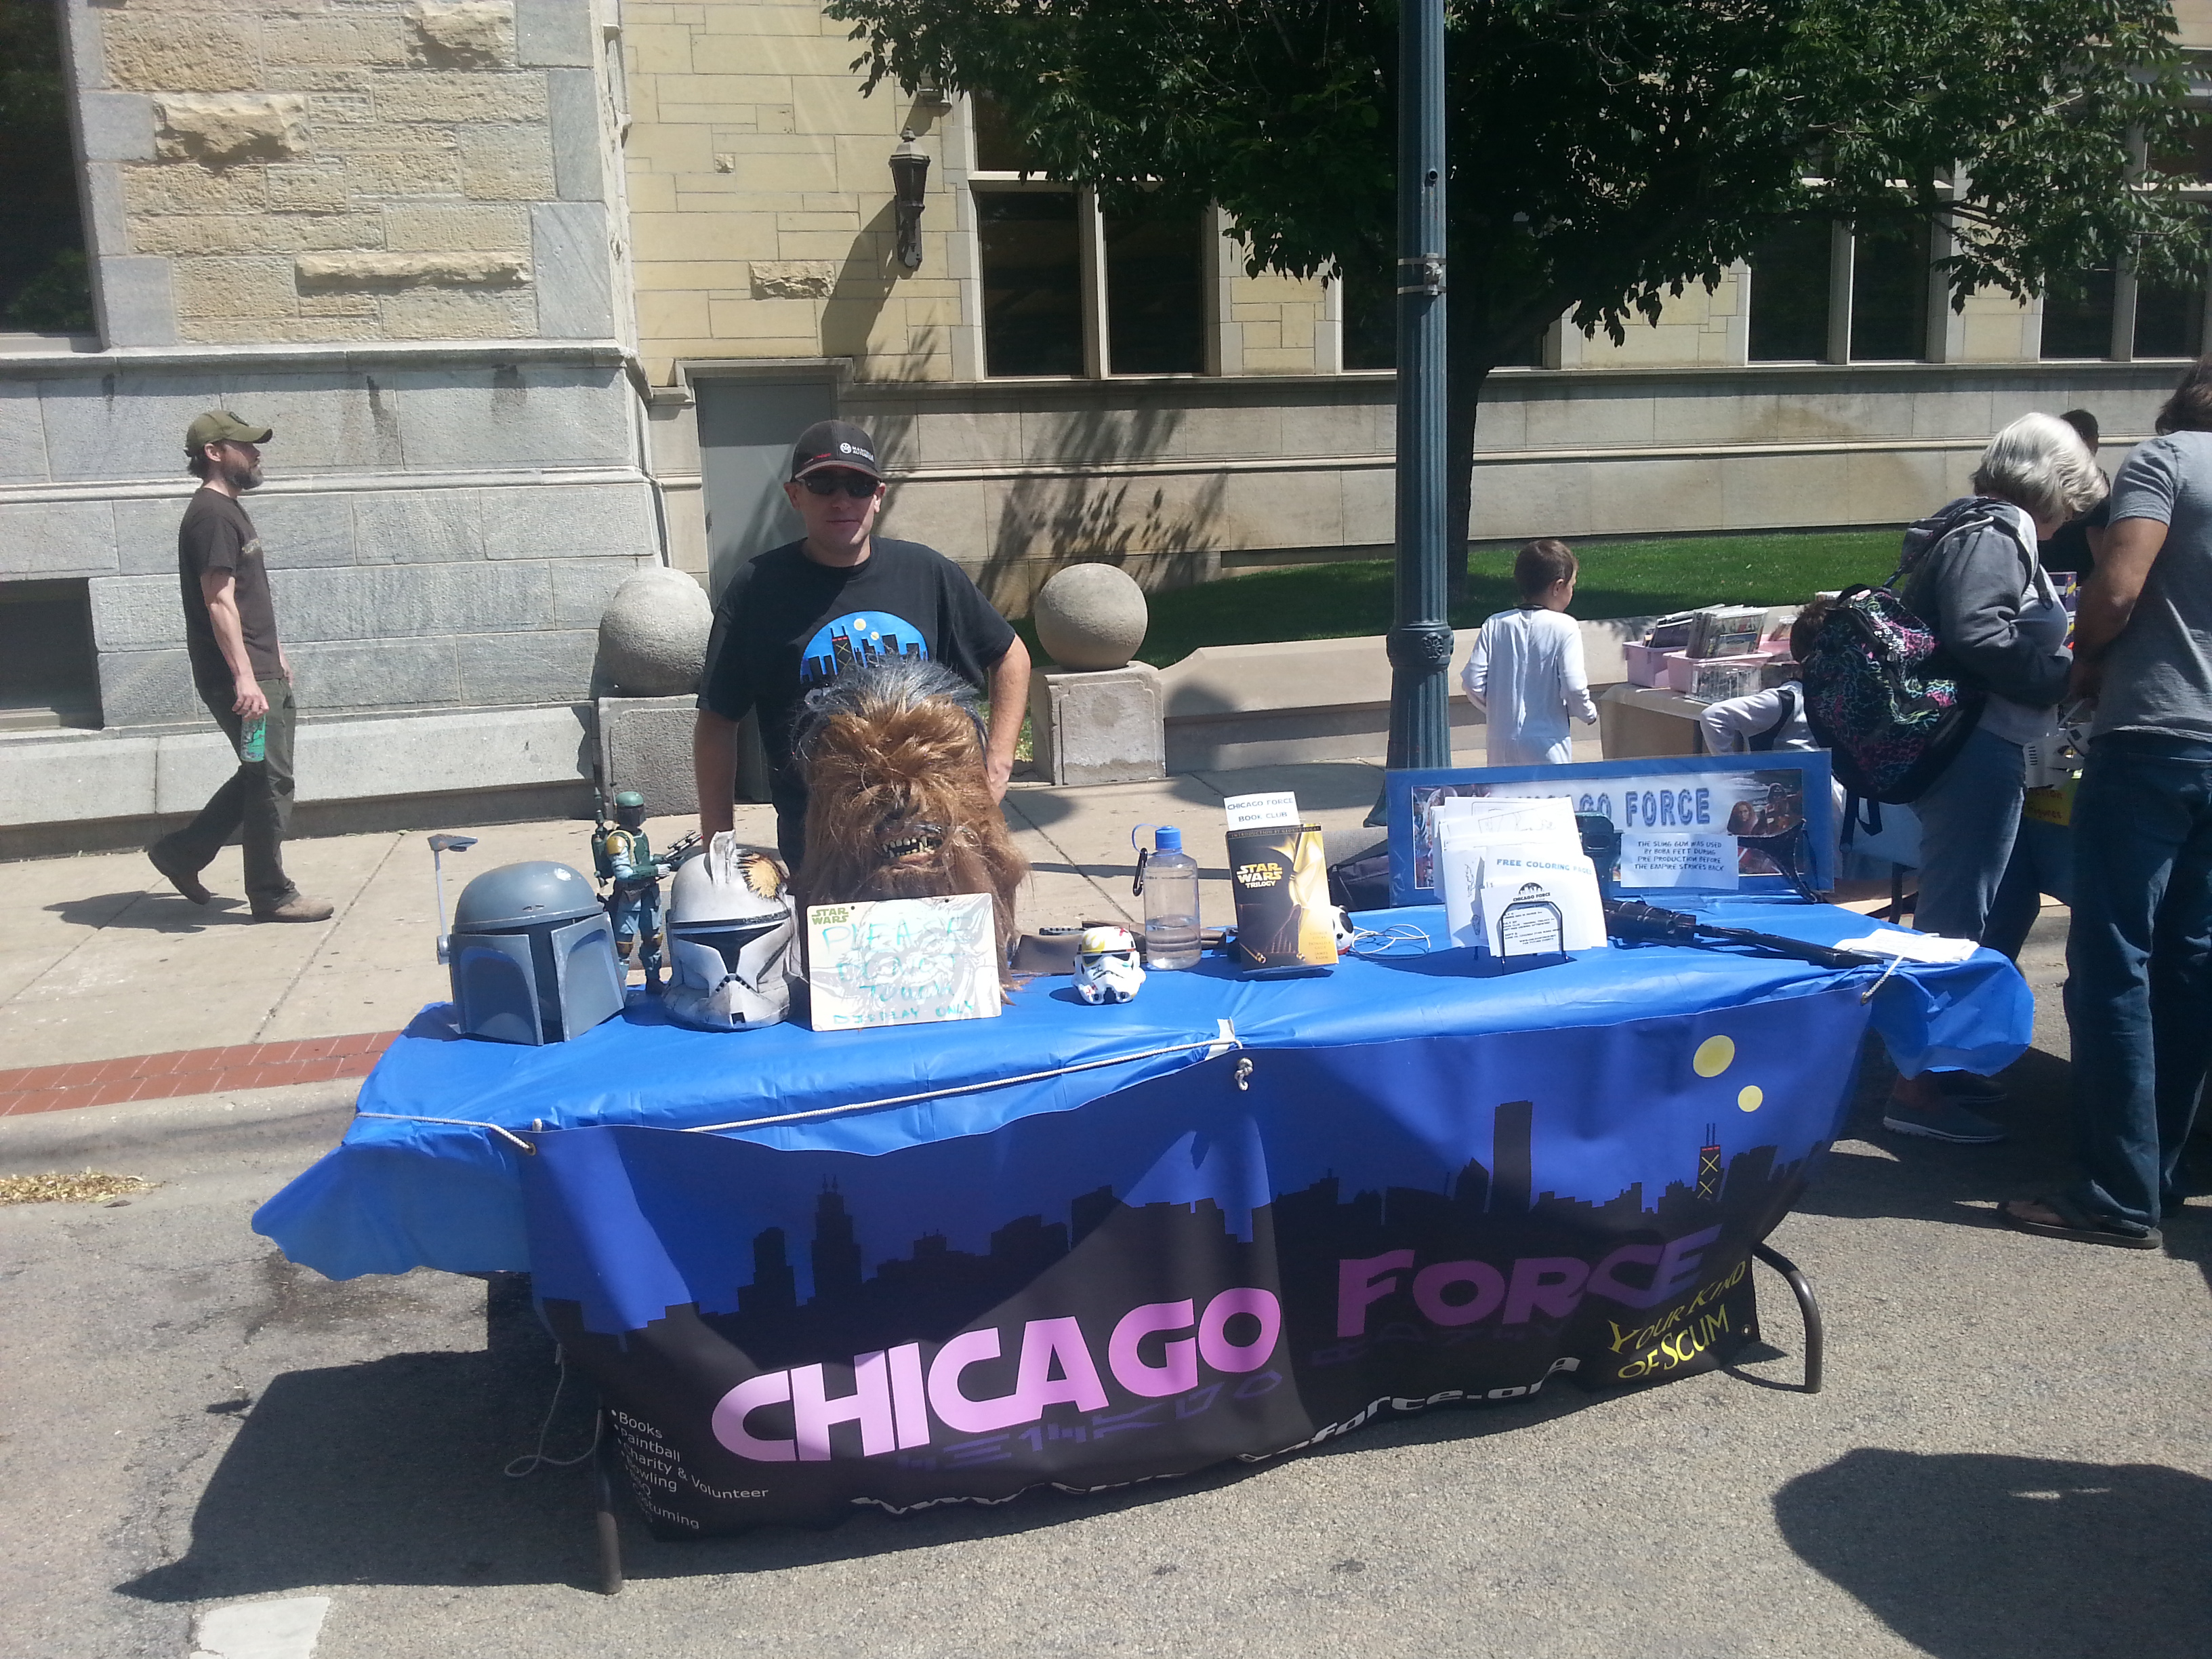 Chicago Force table